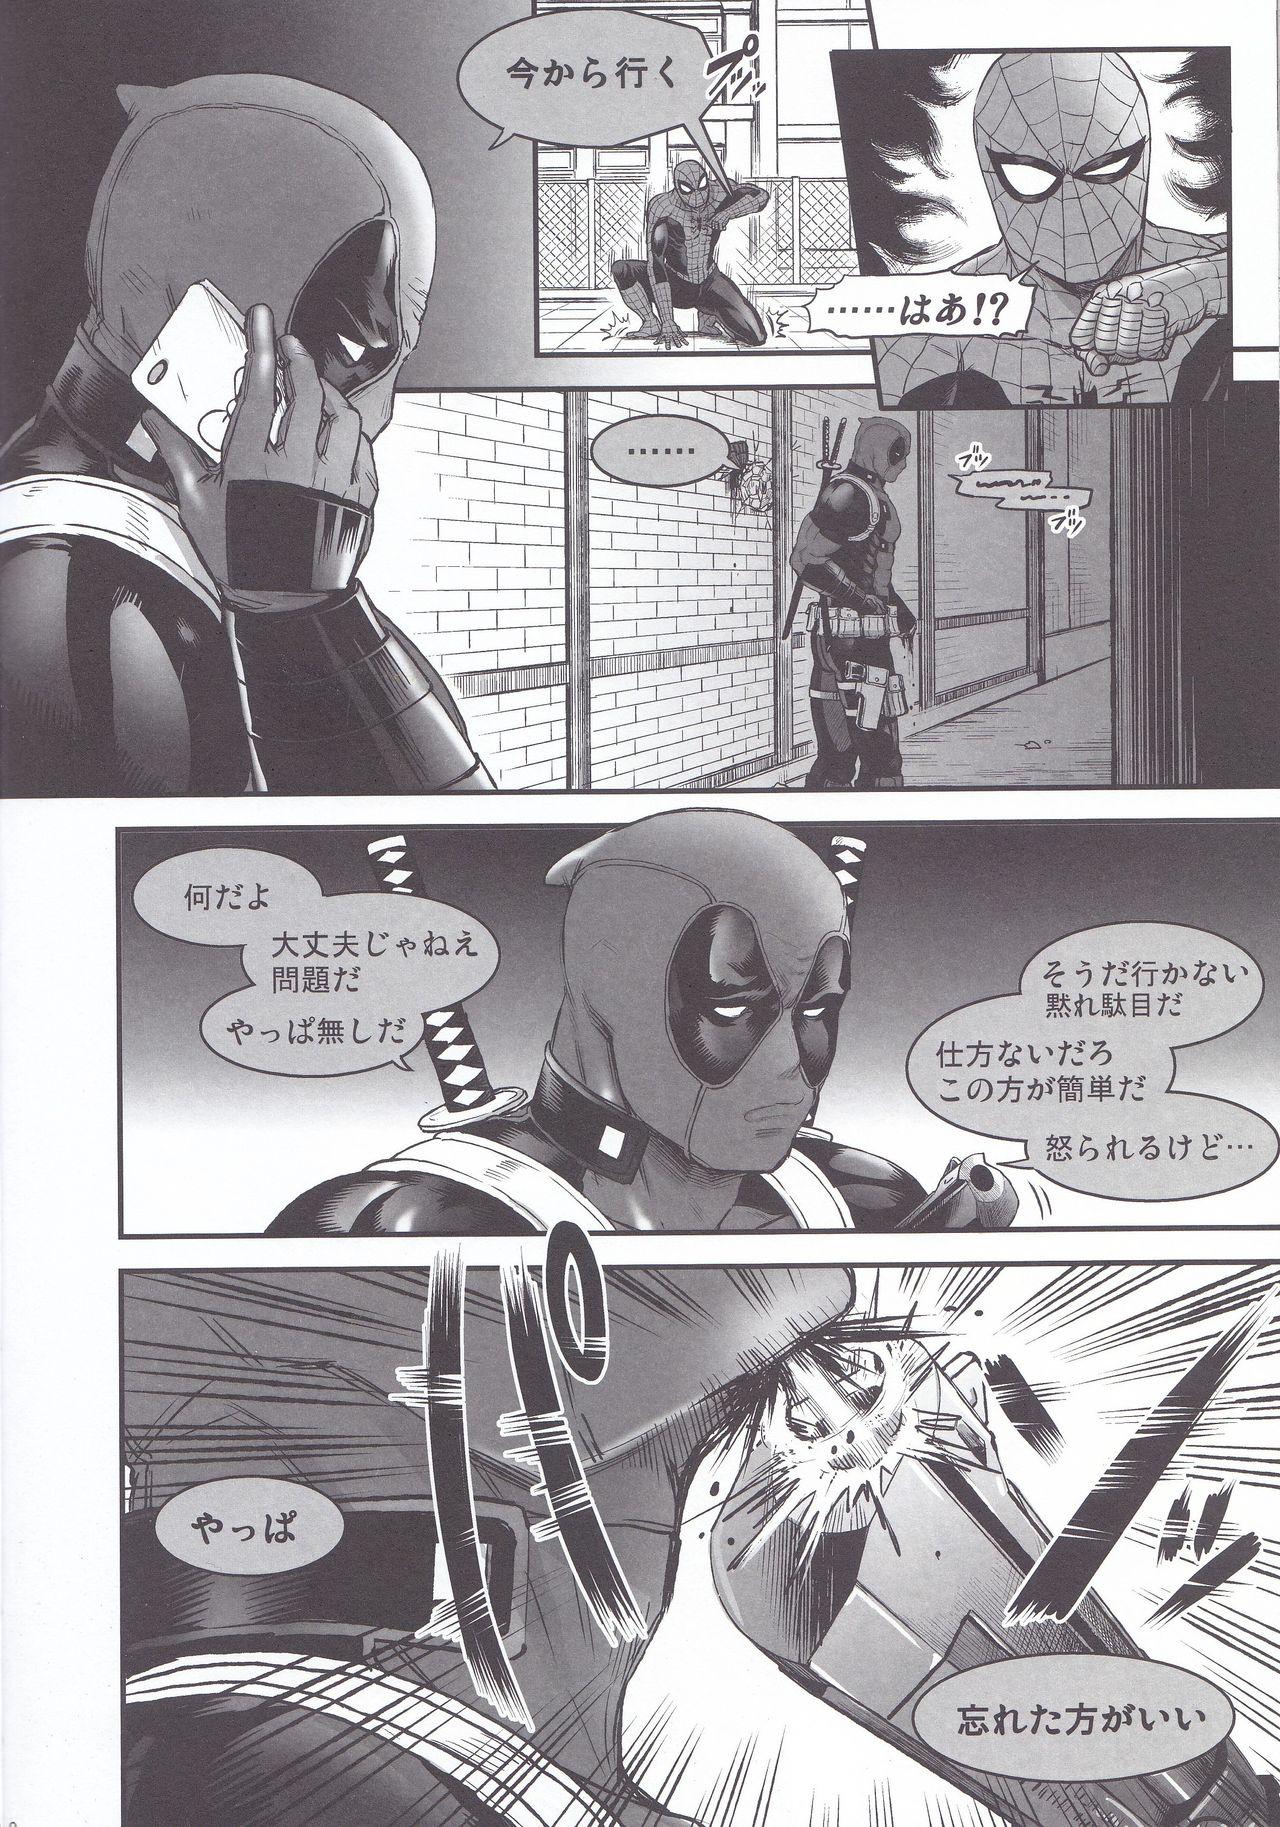 China Hollow - Spider-man Deadpool Exgirlfriend - Page 8